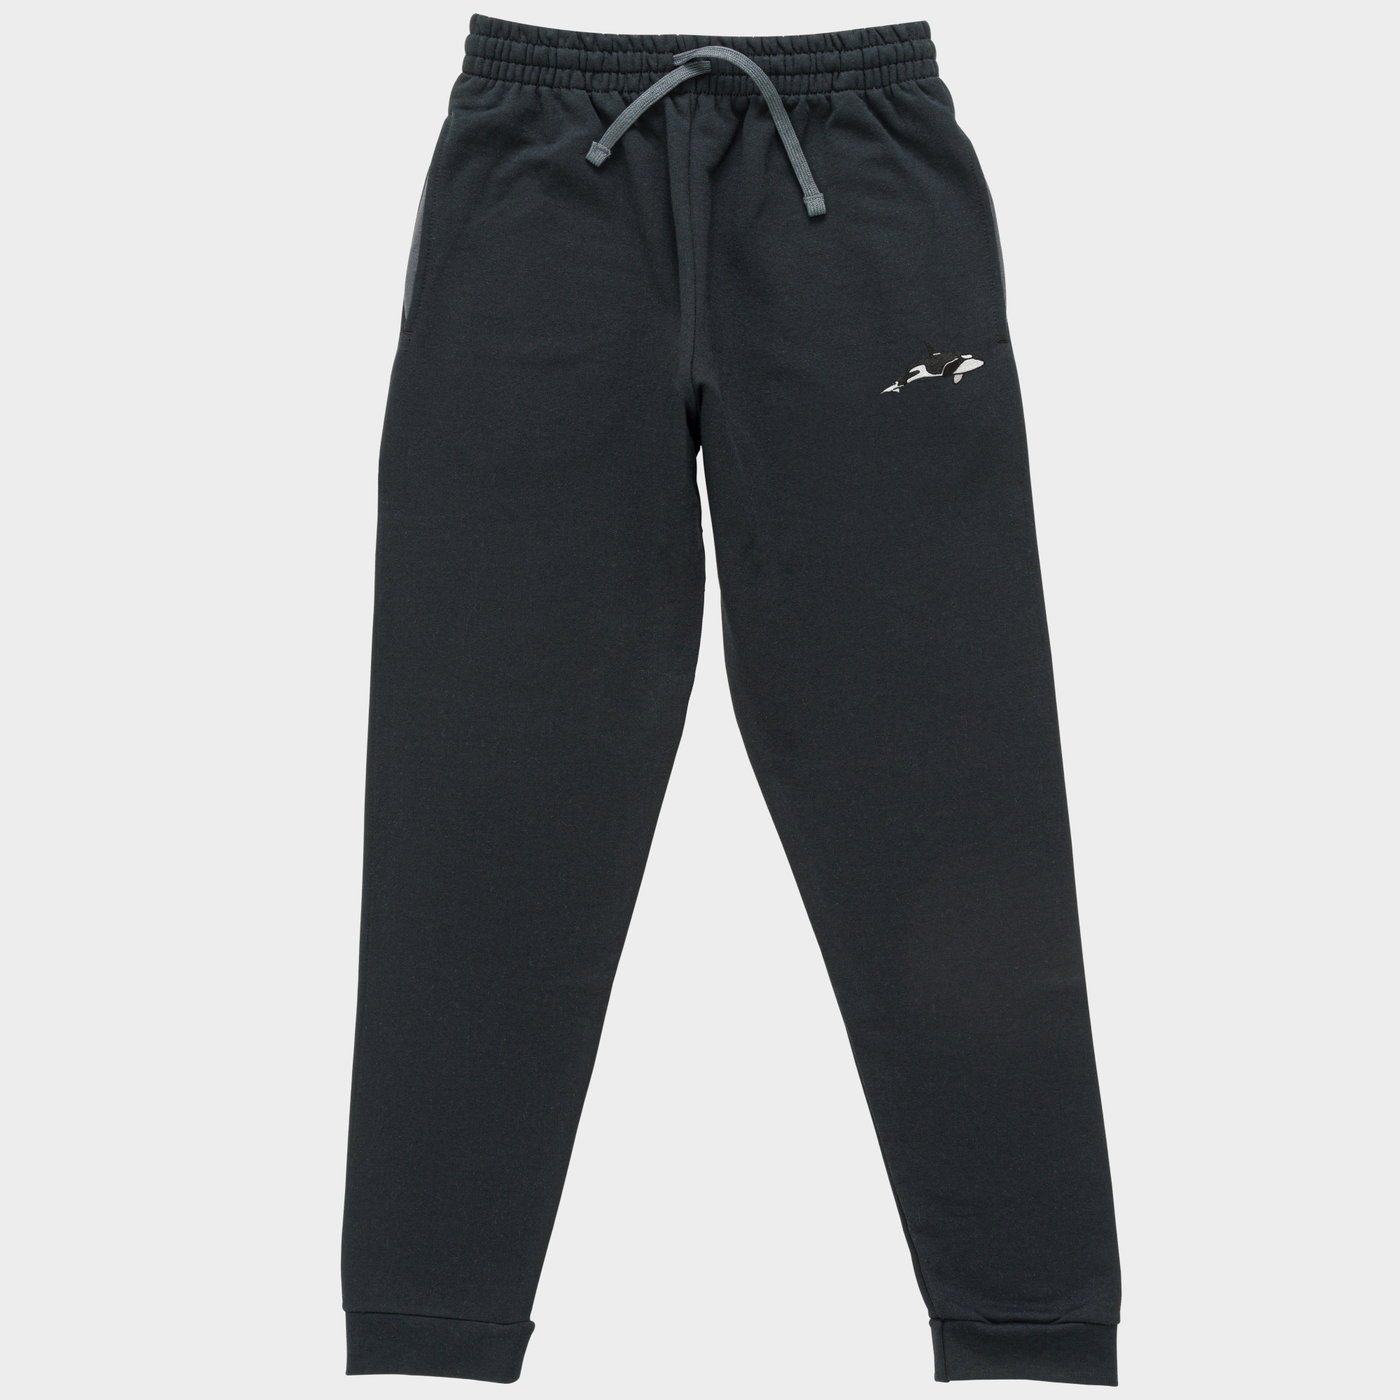 Bobby's Planet Unisex Embroidered Orca Joggers from Seven Seas Fish Animals Collection in Black Color#color_black